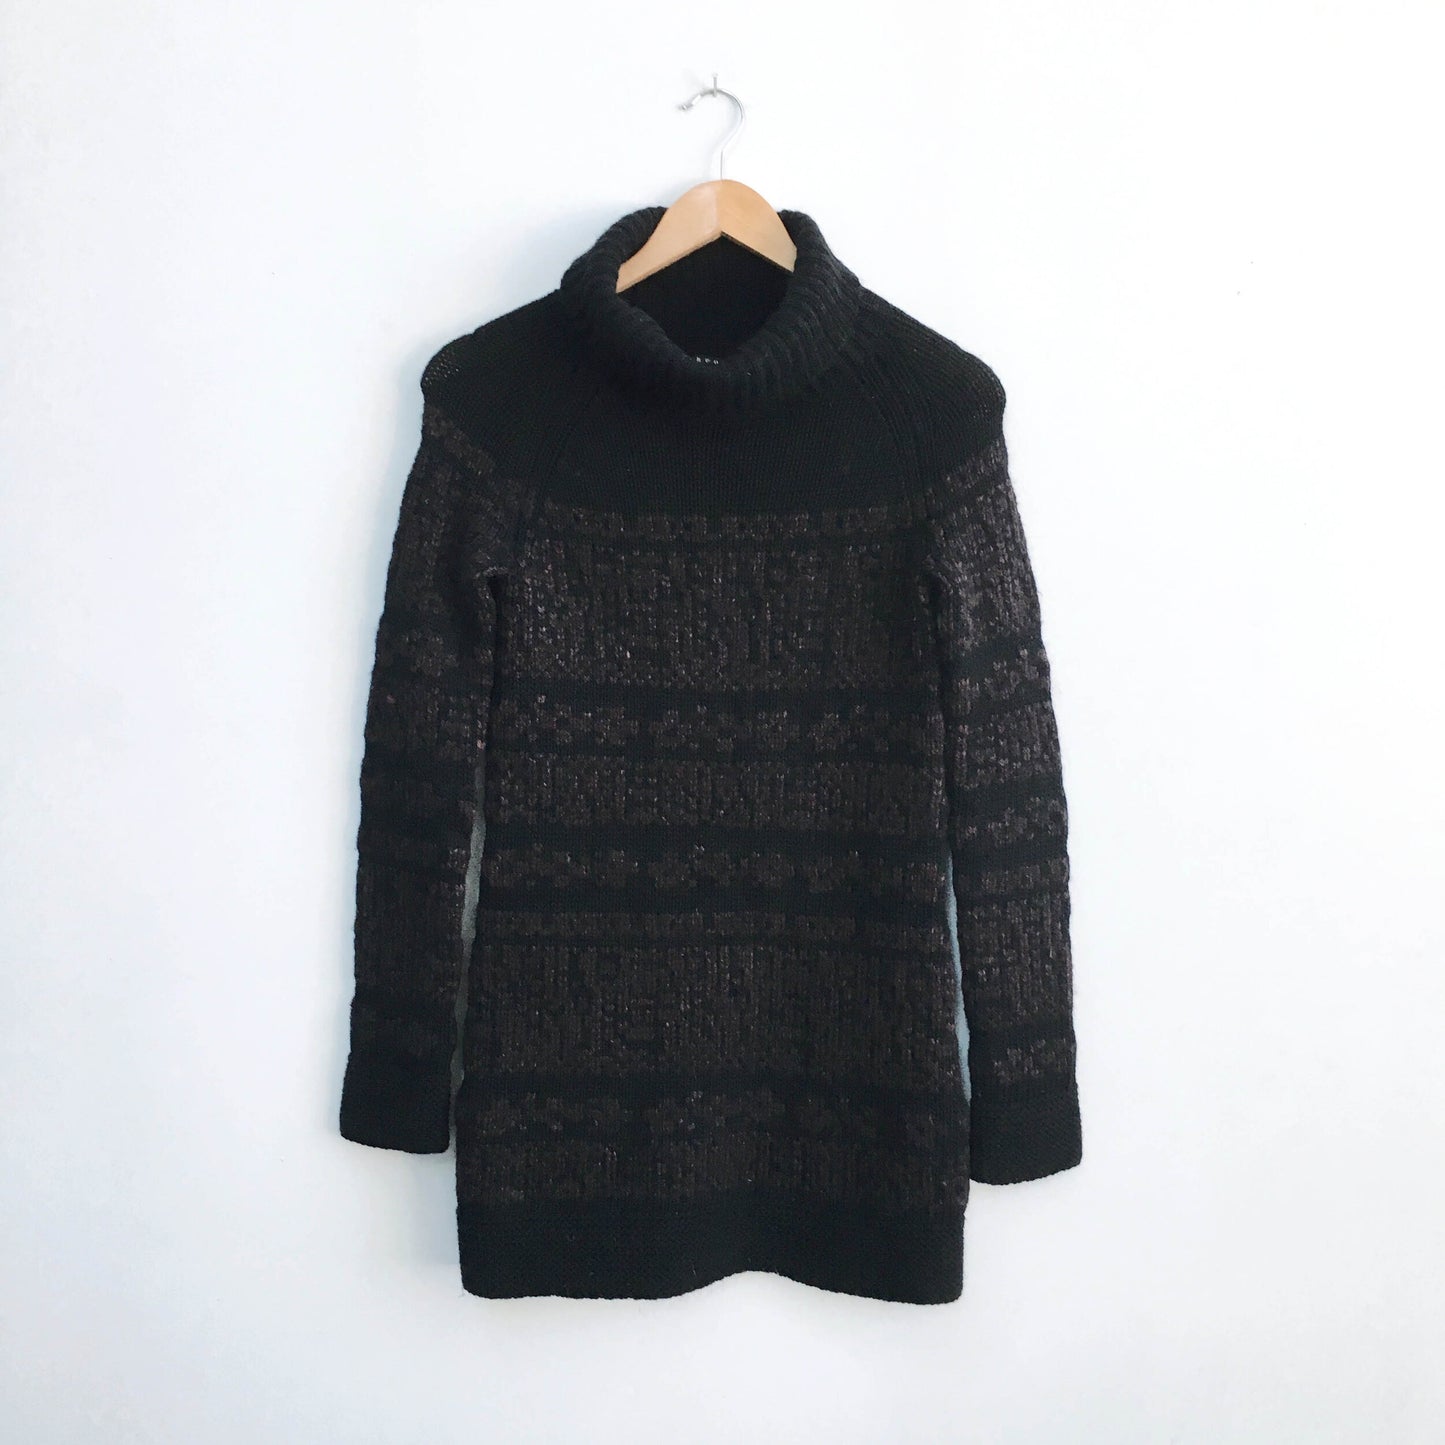 Theory wool-blend turtleneck - size Small